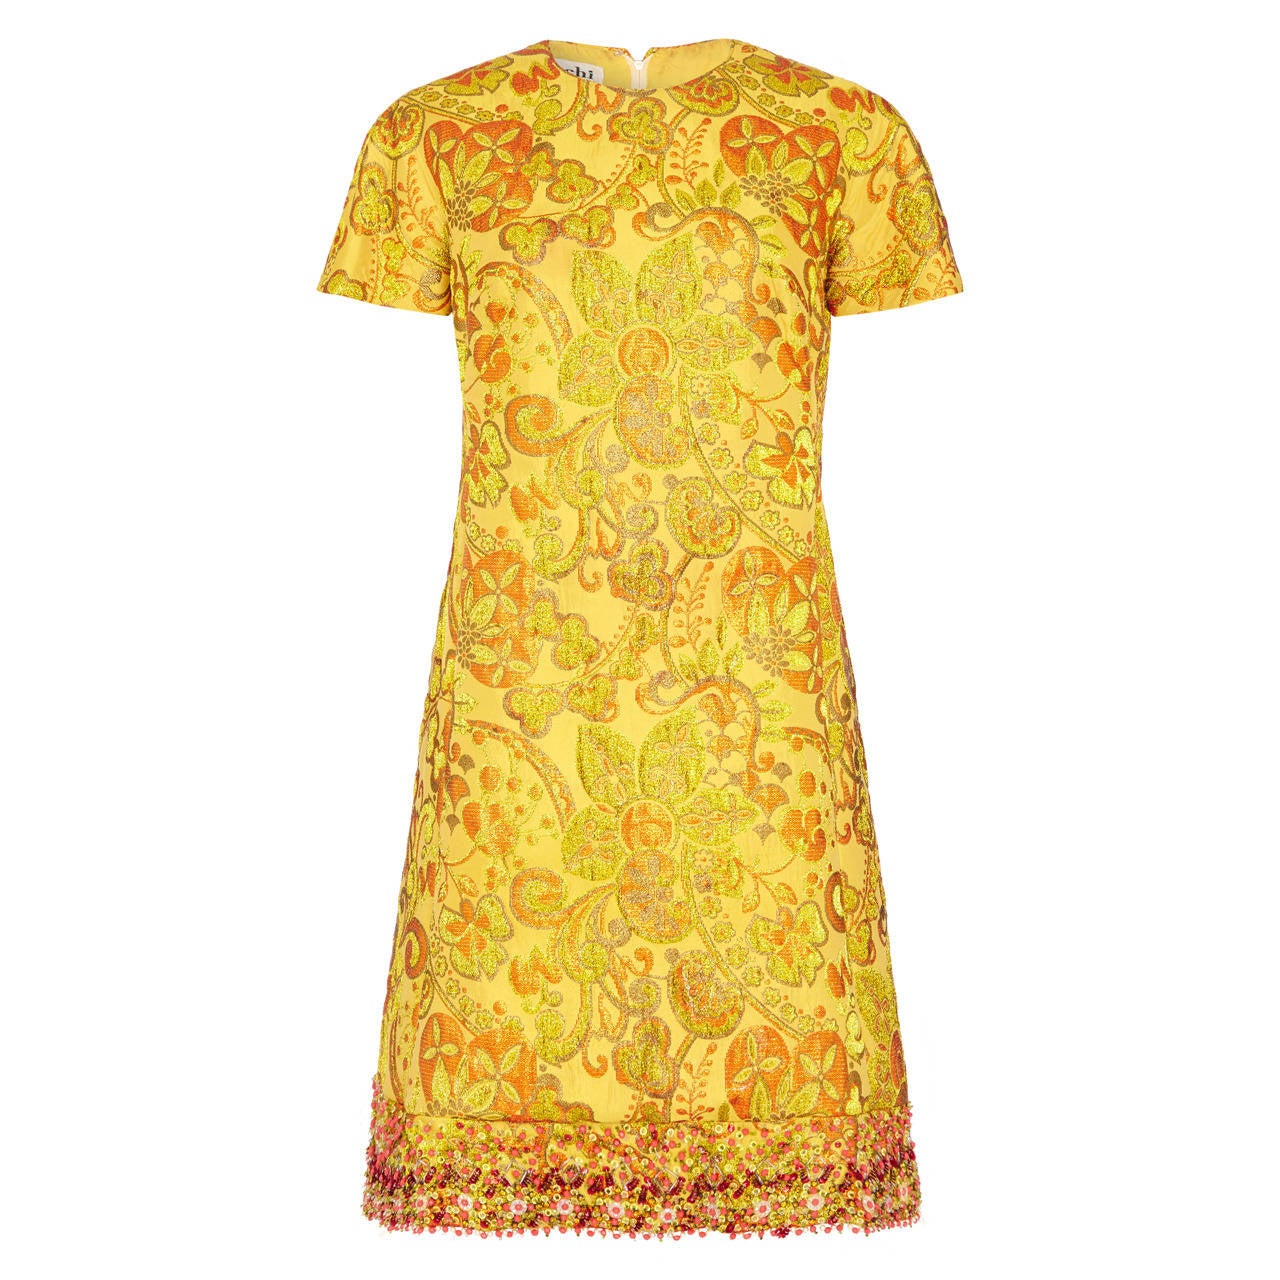 1960s Yellow and Gold Floral Brocade Dress